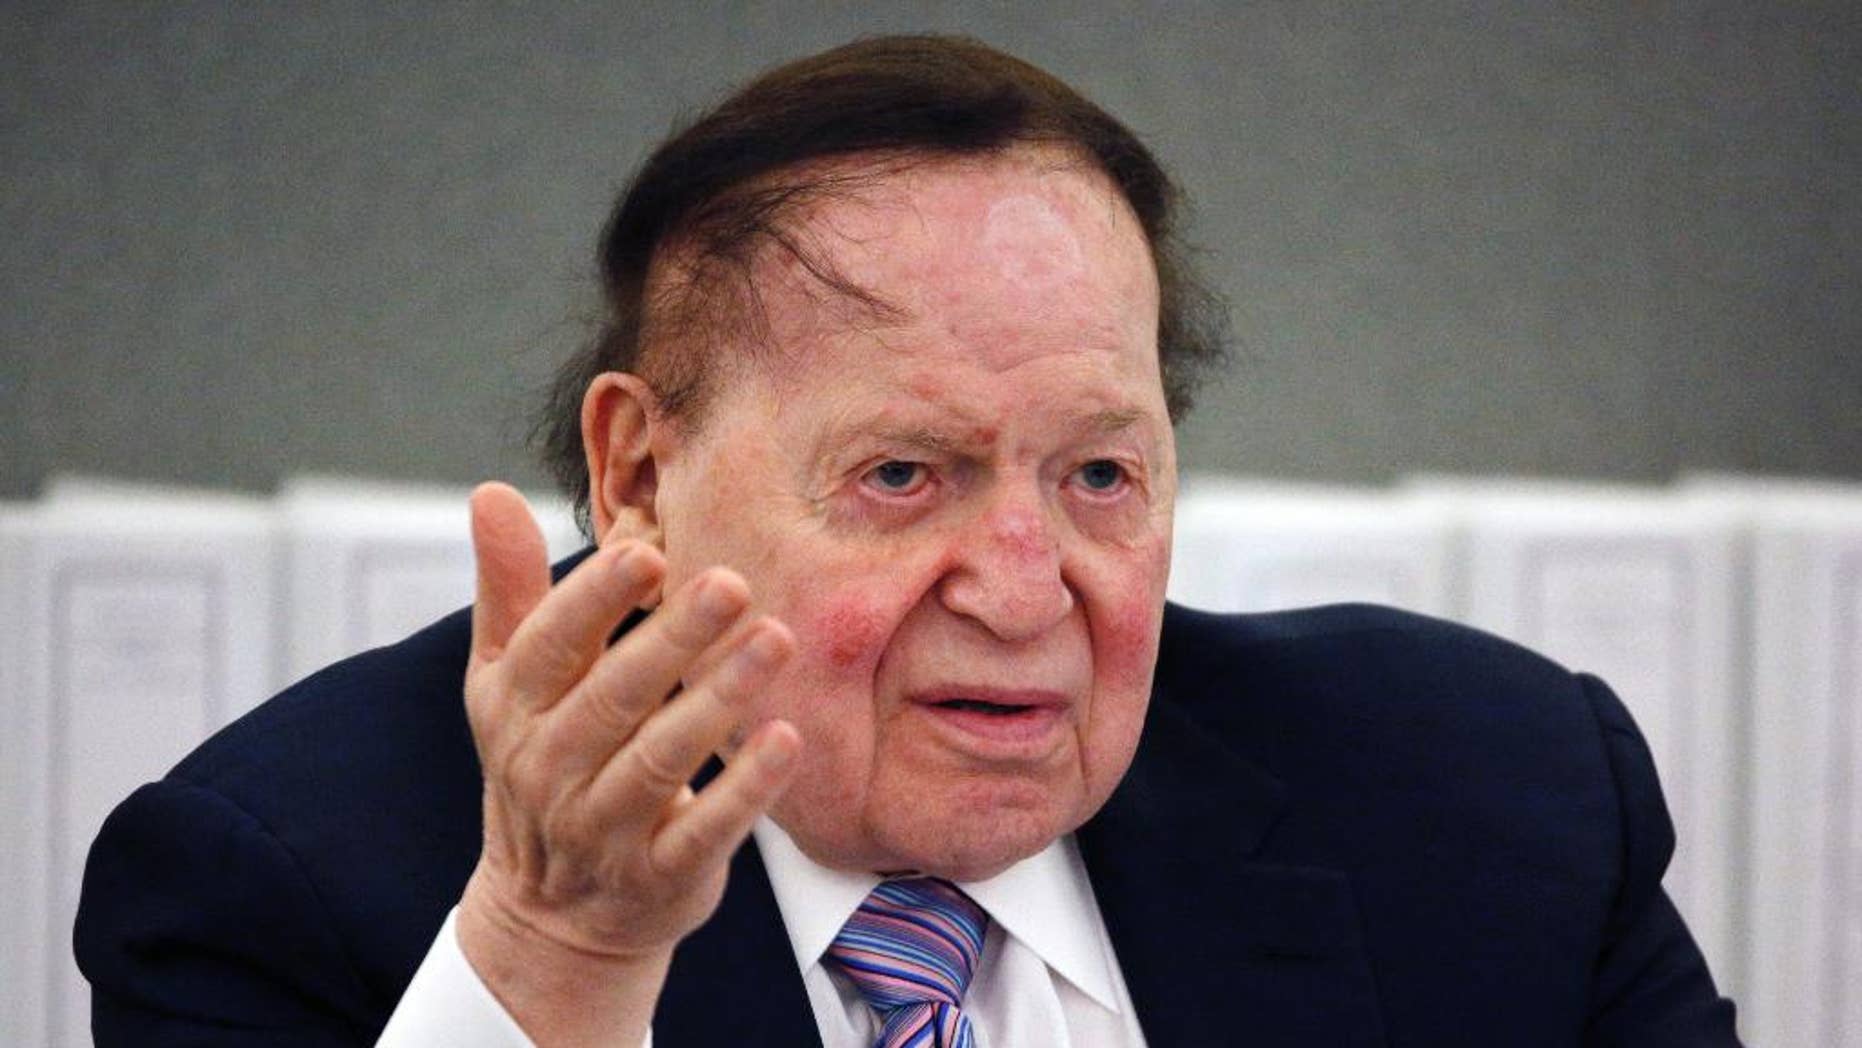 Sheldon Adelson donates $500G to defense fund for targets of Mueller probe: report